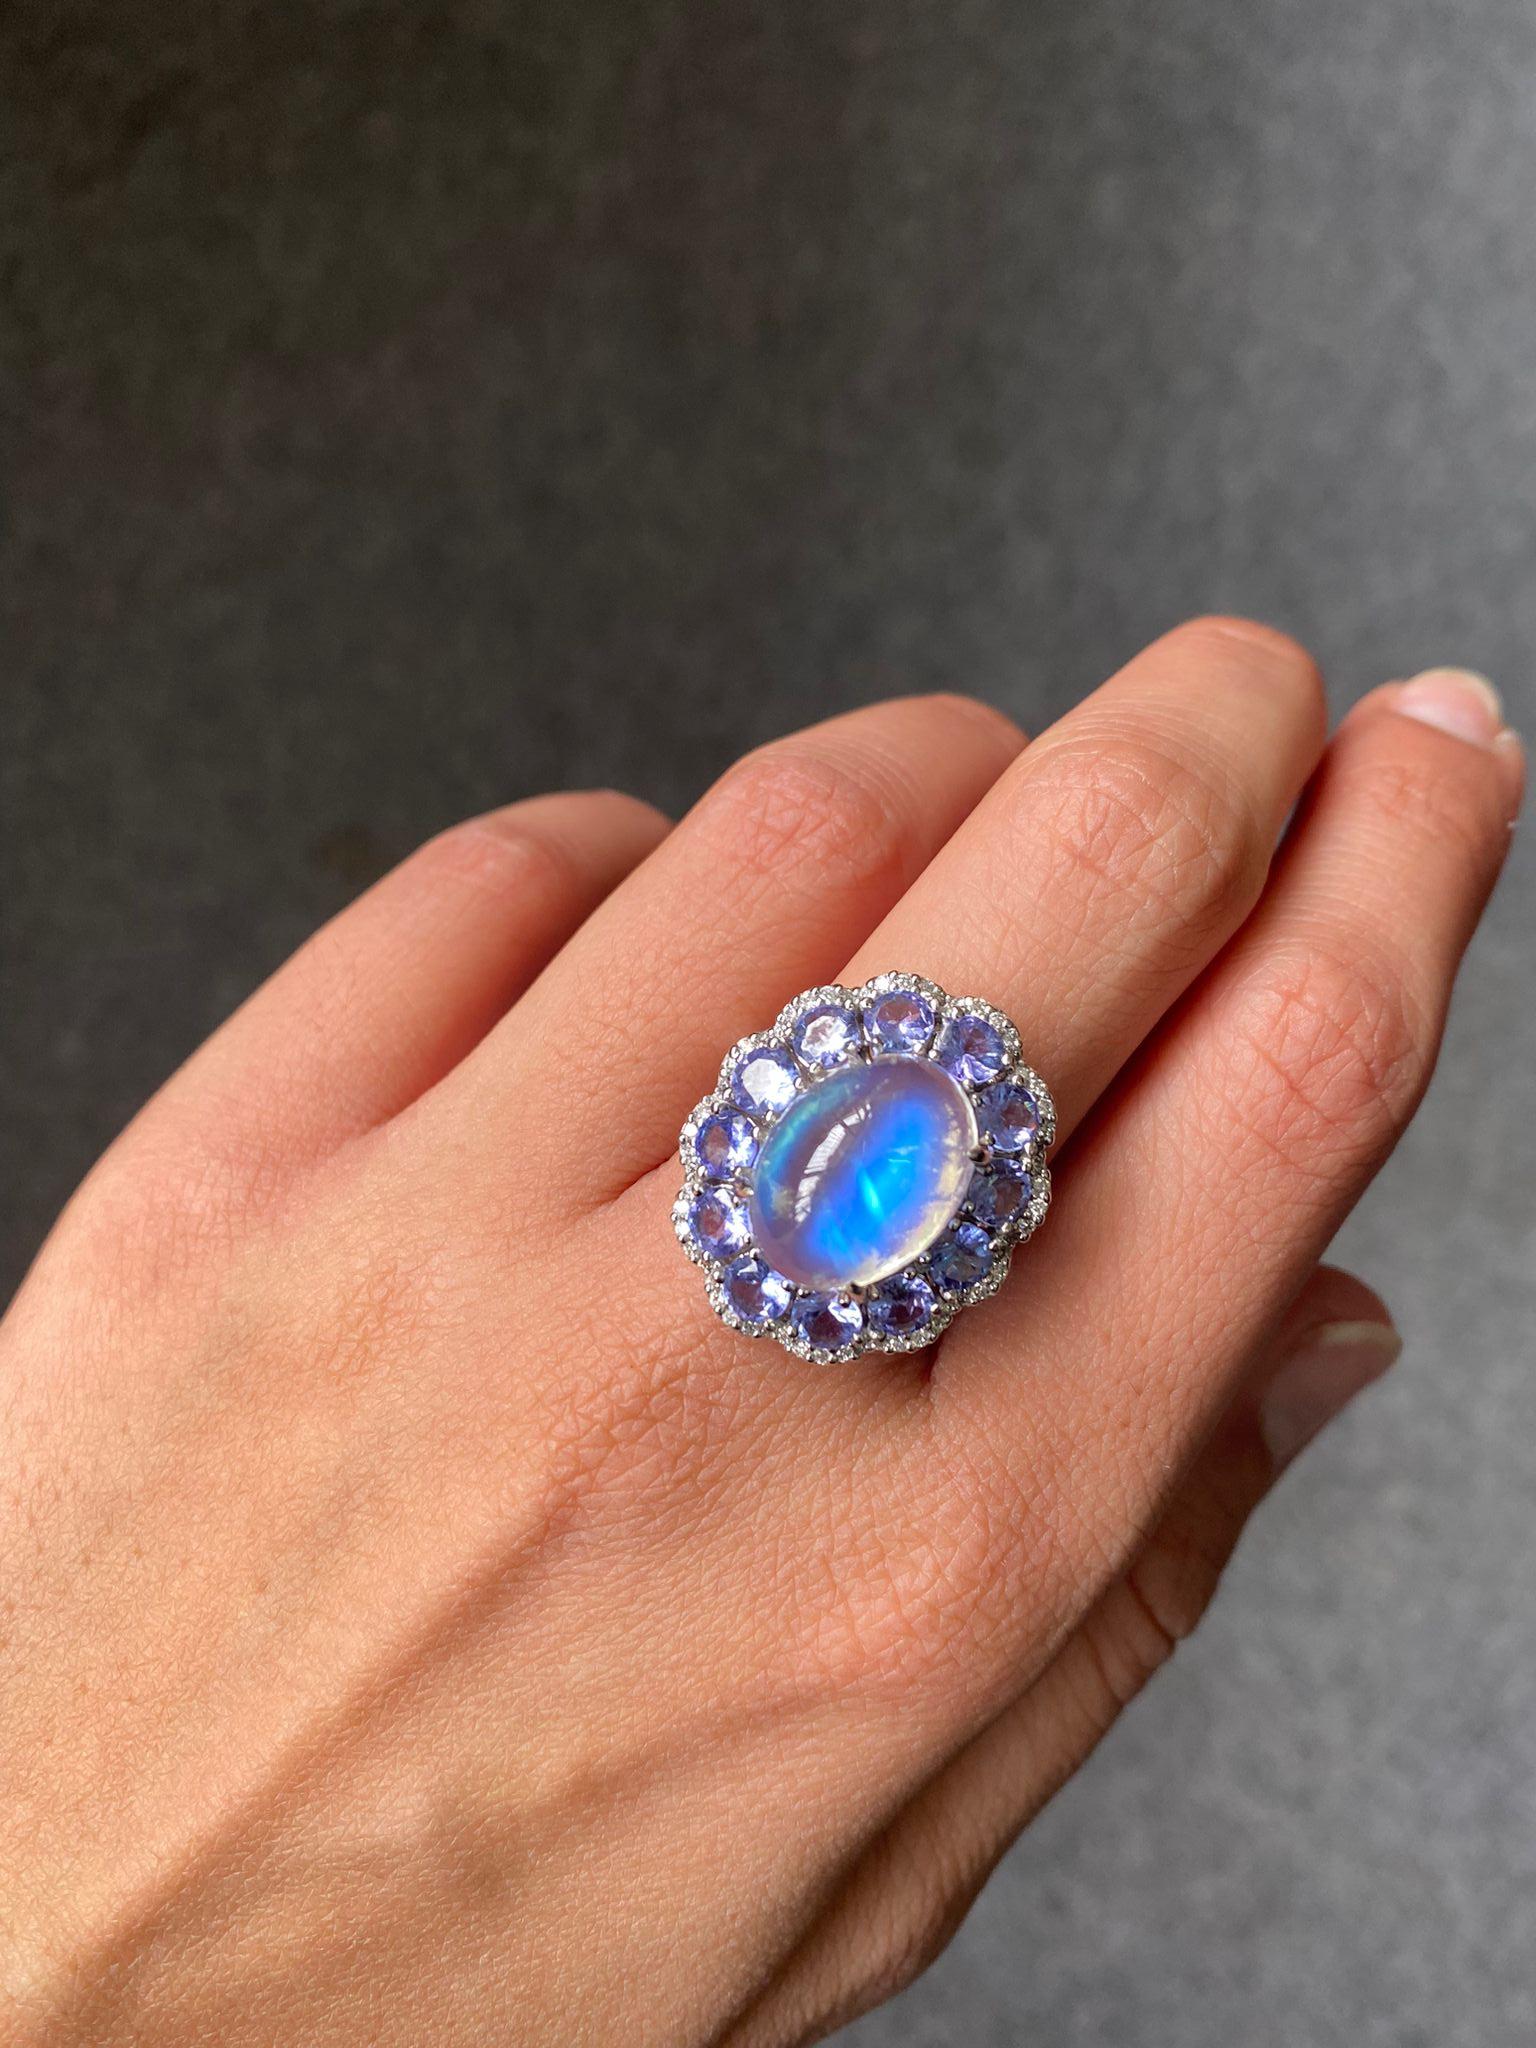 A beautiful 8.07 carat Moonstone cocktail ring with 12 pieces of 2.82 carat Blue Sapphire rose cut rounds surrounding it with 0.36 carat White Diamonds, all set in solid 18K White Gold. Currently  sized at US7, can be resized. The combination of